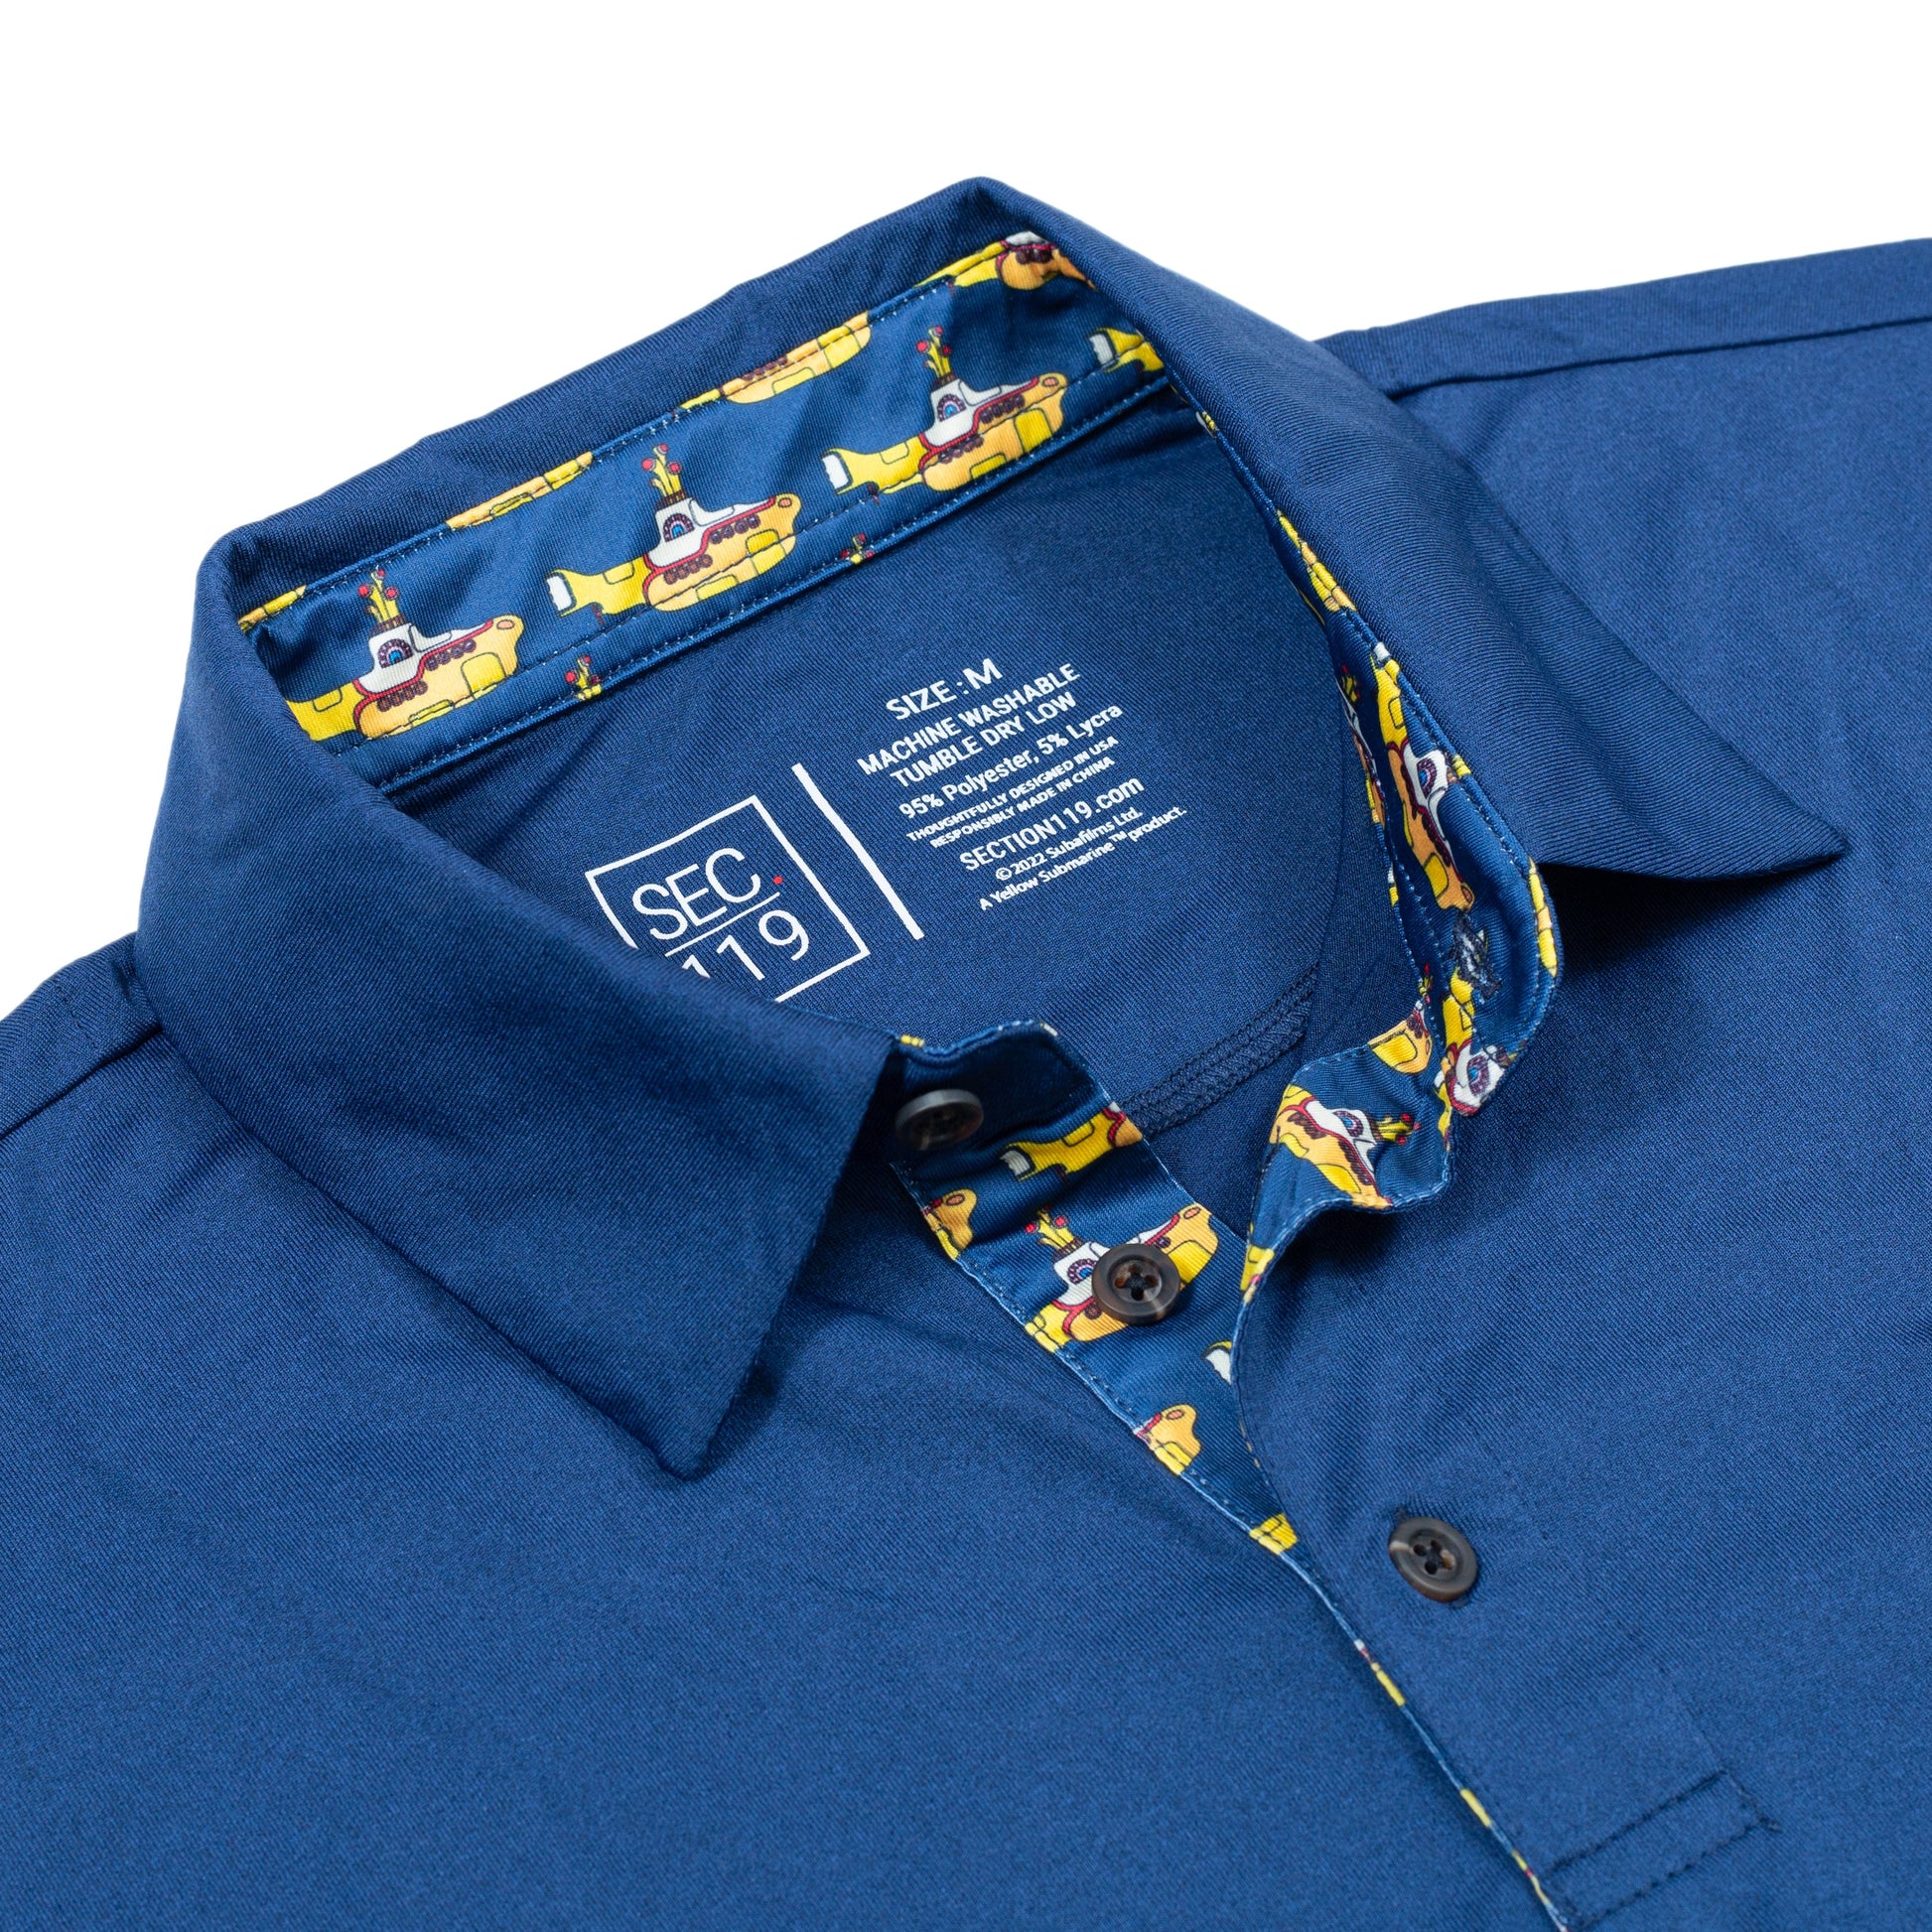 The Beatles Navy Yellow Submarine Dry Fit Polo - Section 119